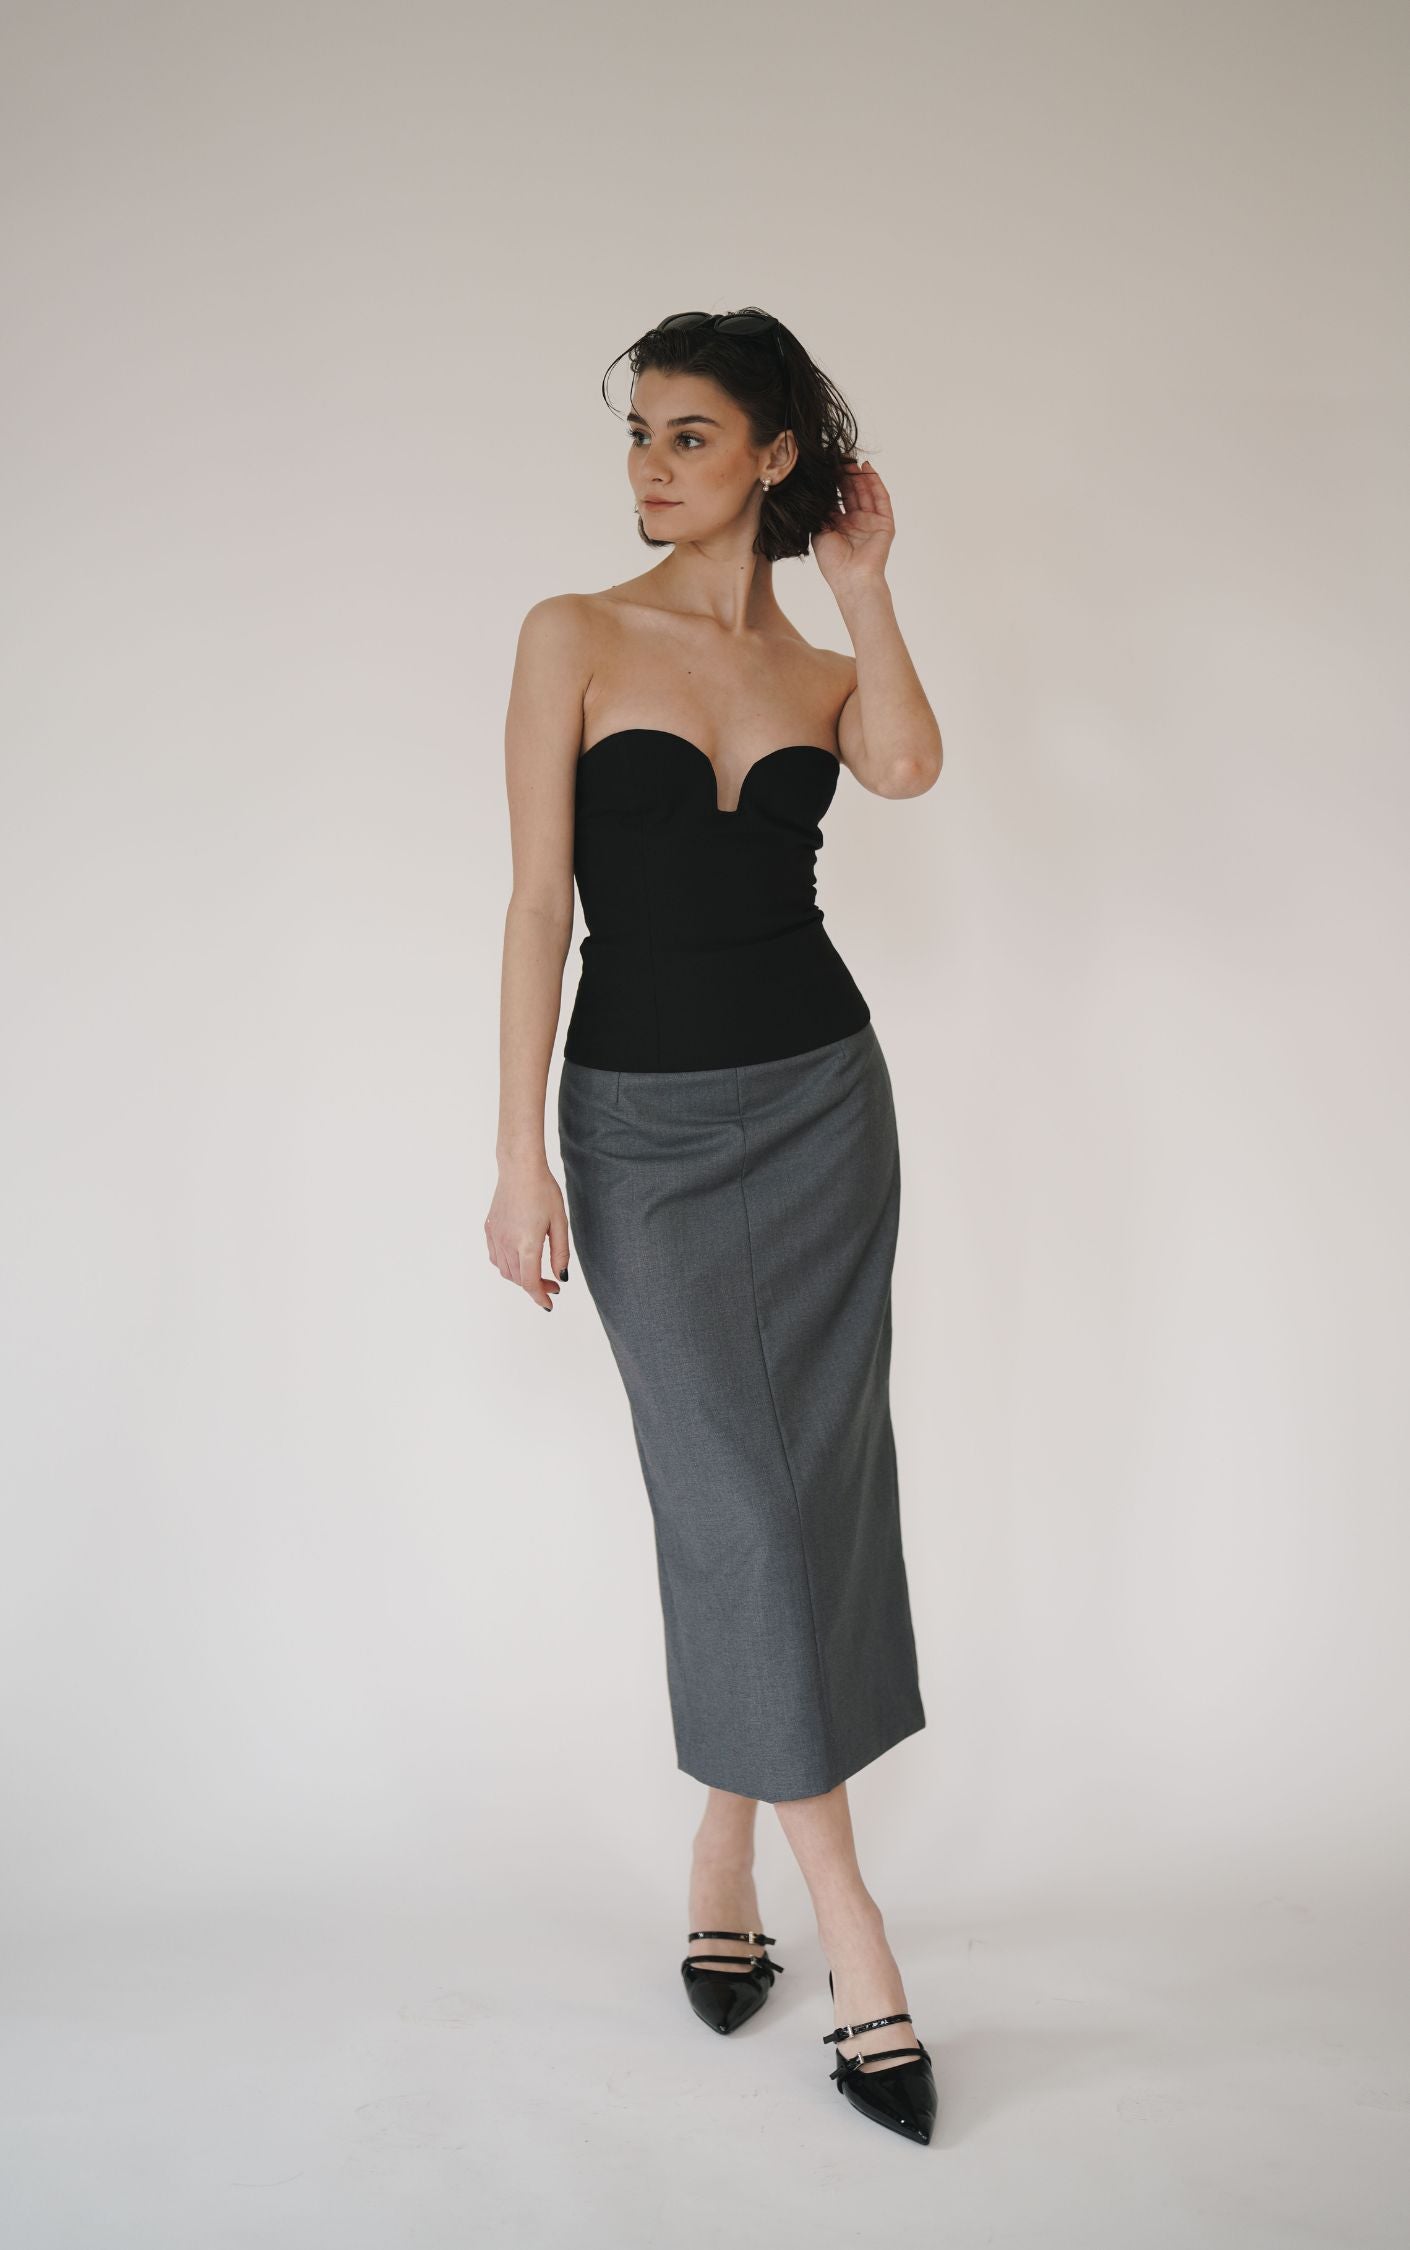 Women's Black Pencil Skirt Fitted Rib Knit Below The Knee - KNITTONS